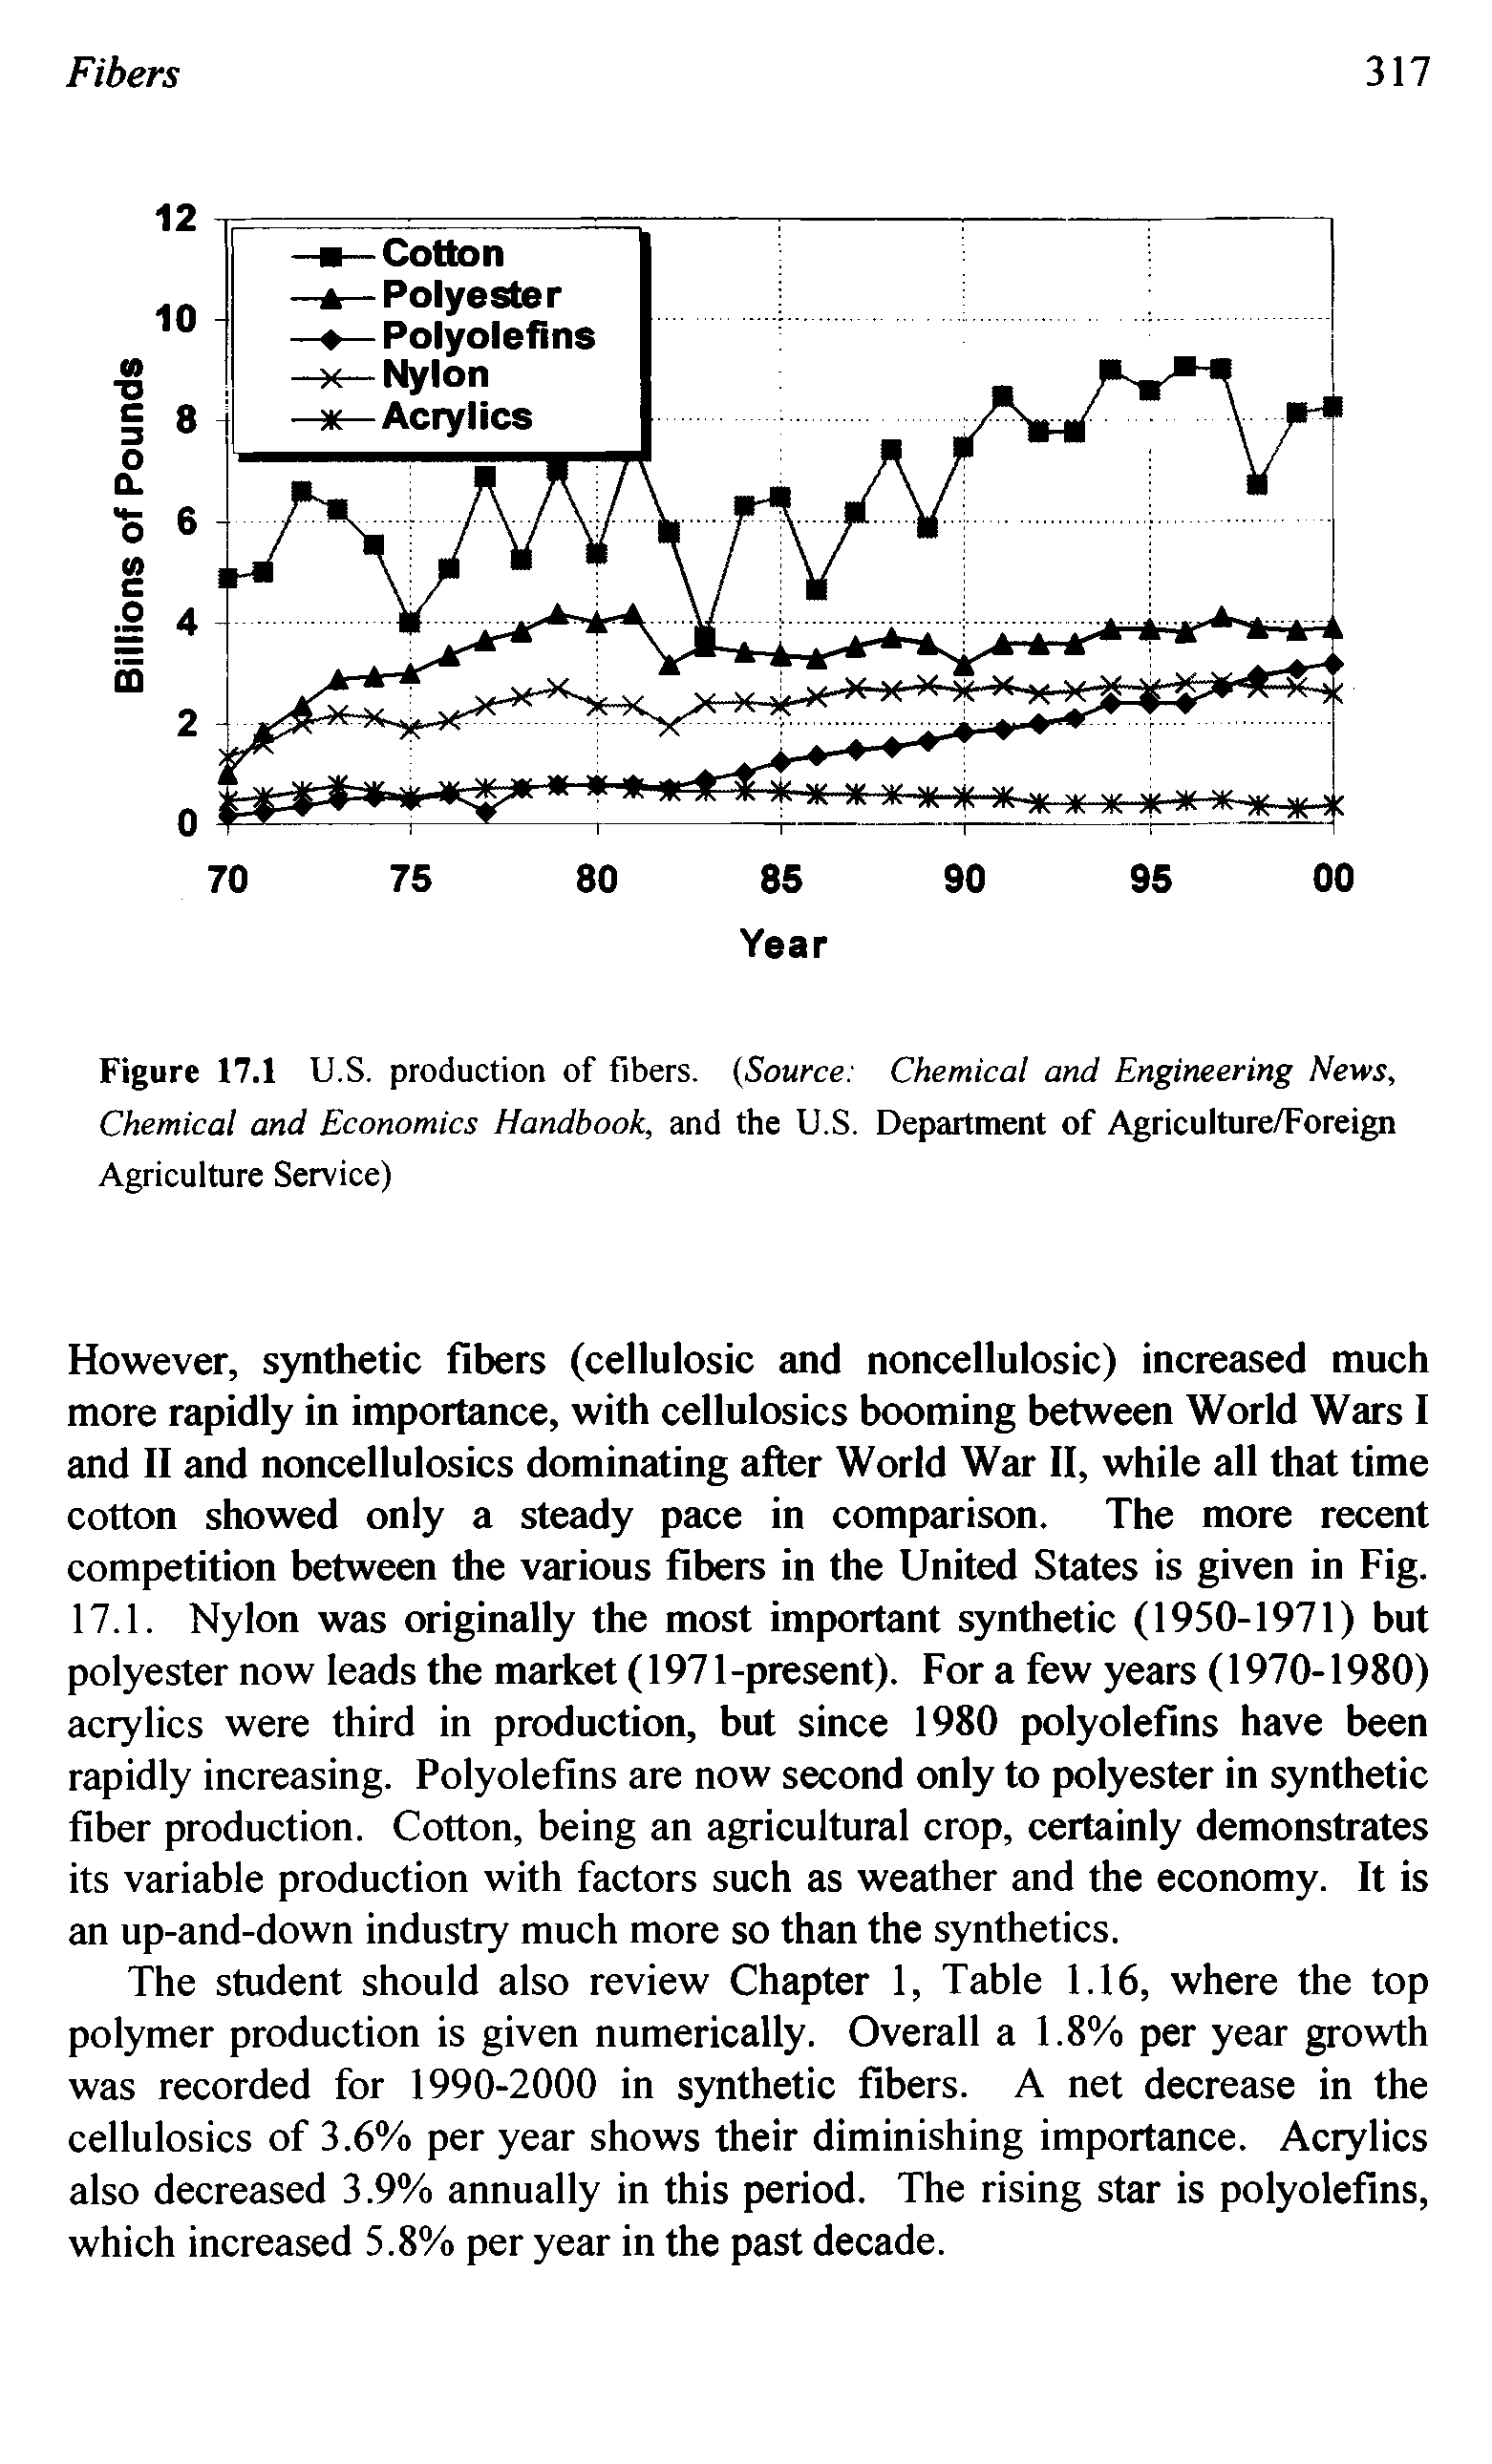 Figure 17.1 U.S. production of fibers. (Source Chemical and Engineering News, Chemical and Economics Handbook, and the U.S. Department of Agriculture/Foreign Agriculture Service)...